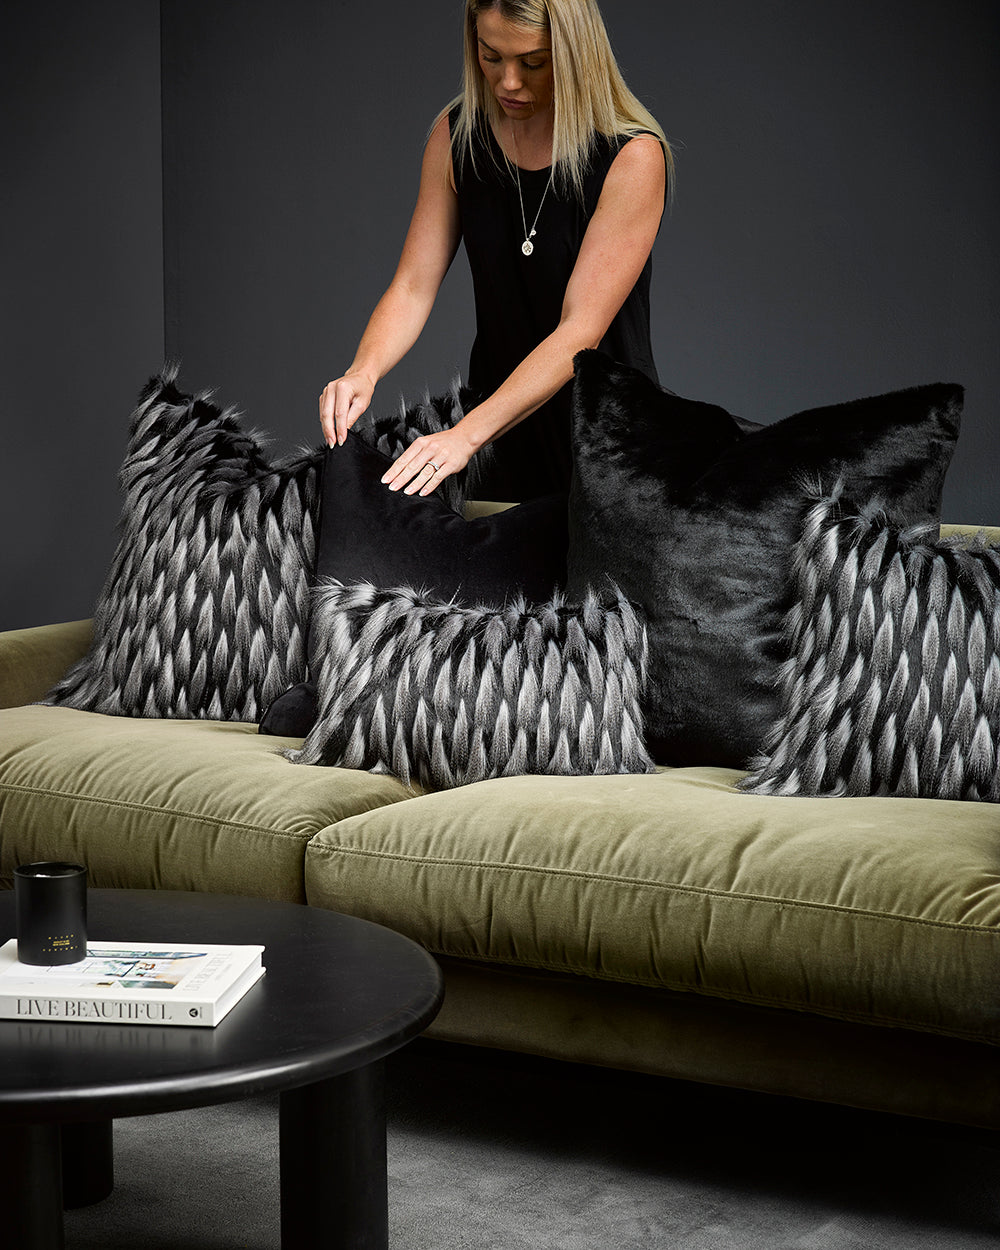 Heirloom Guinea Fowl Cushions in Faux Fur are available from Make Your House A Home Premium Stockist. Furniture Store Bendigo, Victoria. Australia Wide Delivery. Furtex Baya.